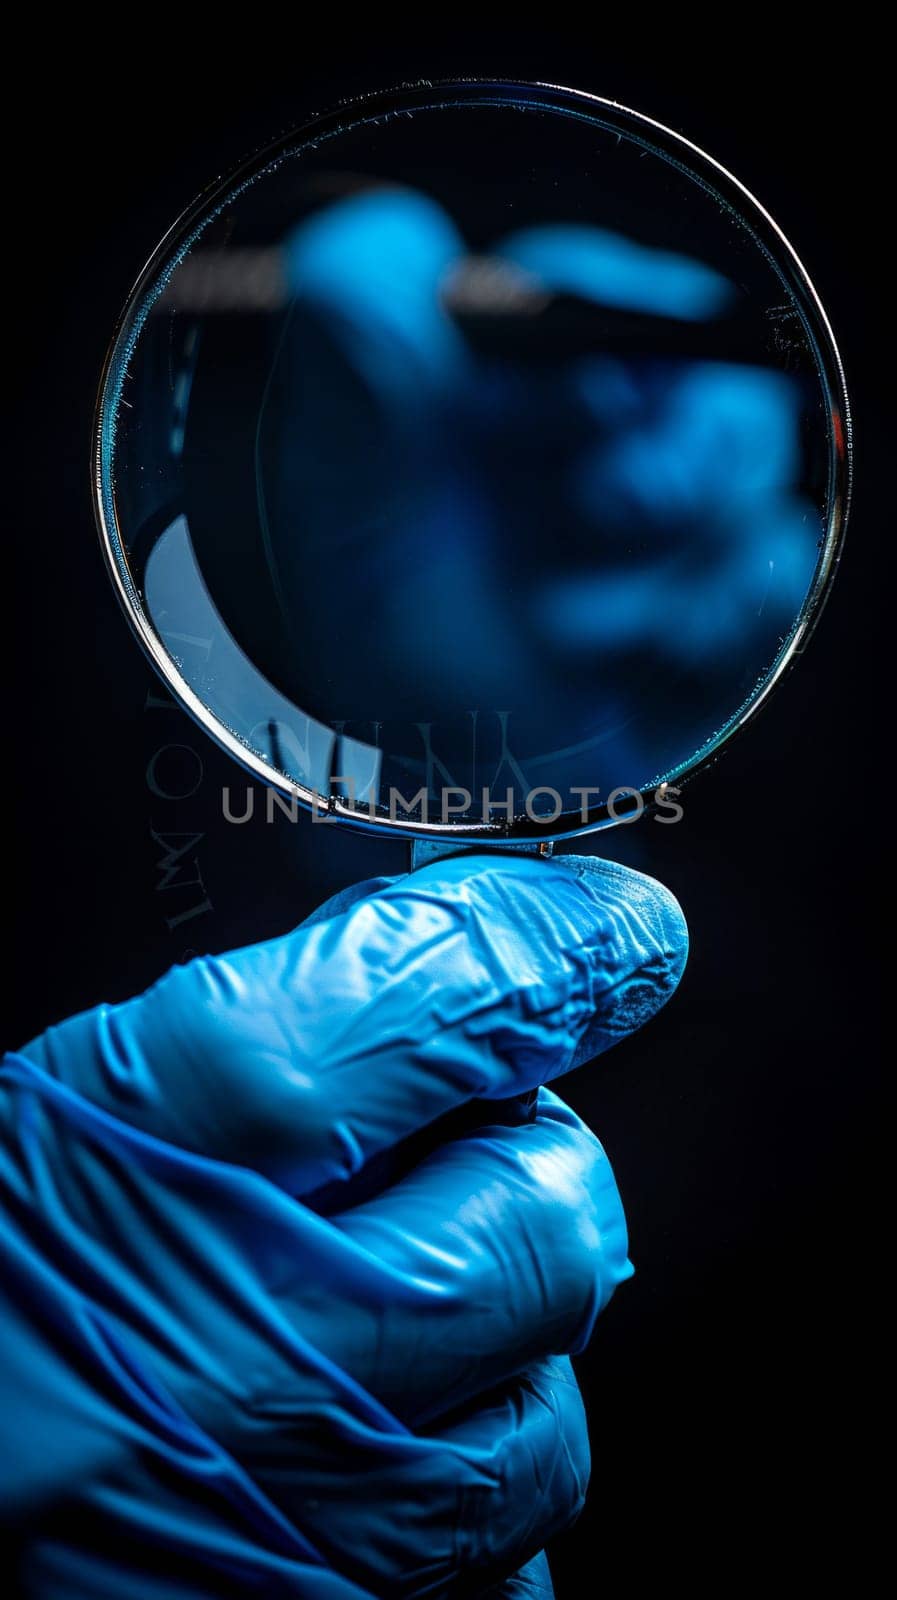 A person in blue gloves carefully inspects an object through a magnifying glass, exploring every detail with curiosity.